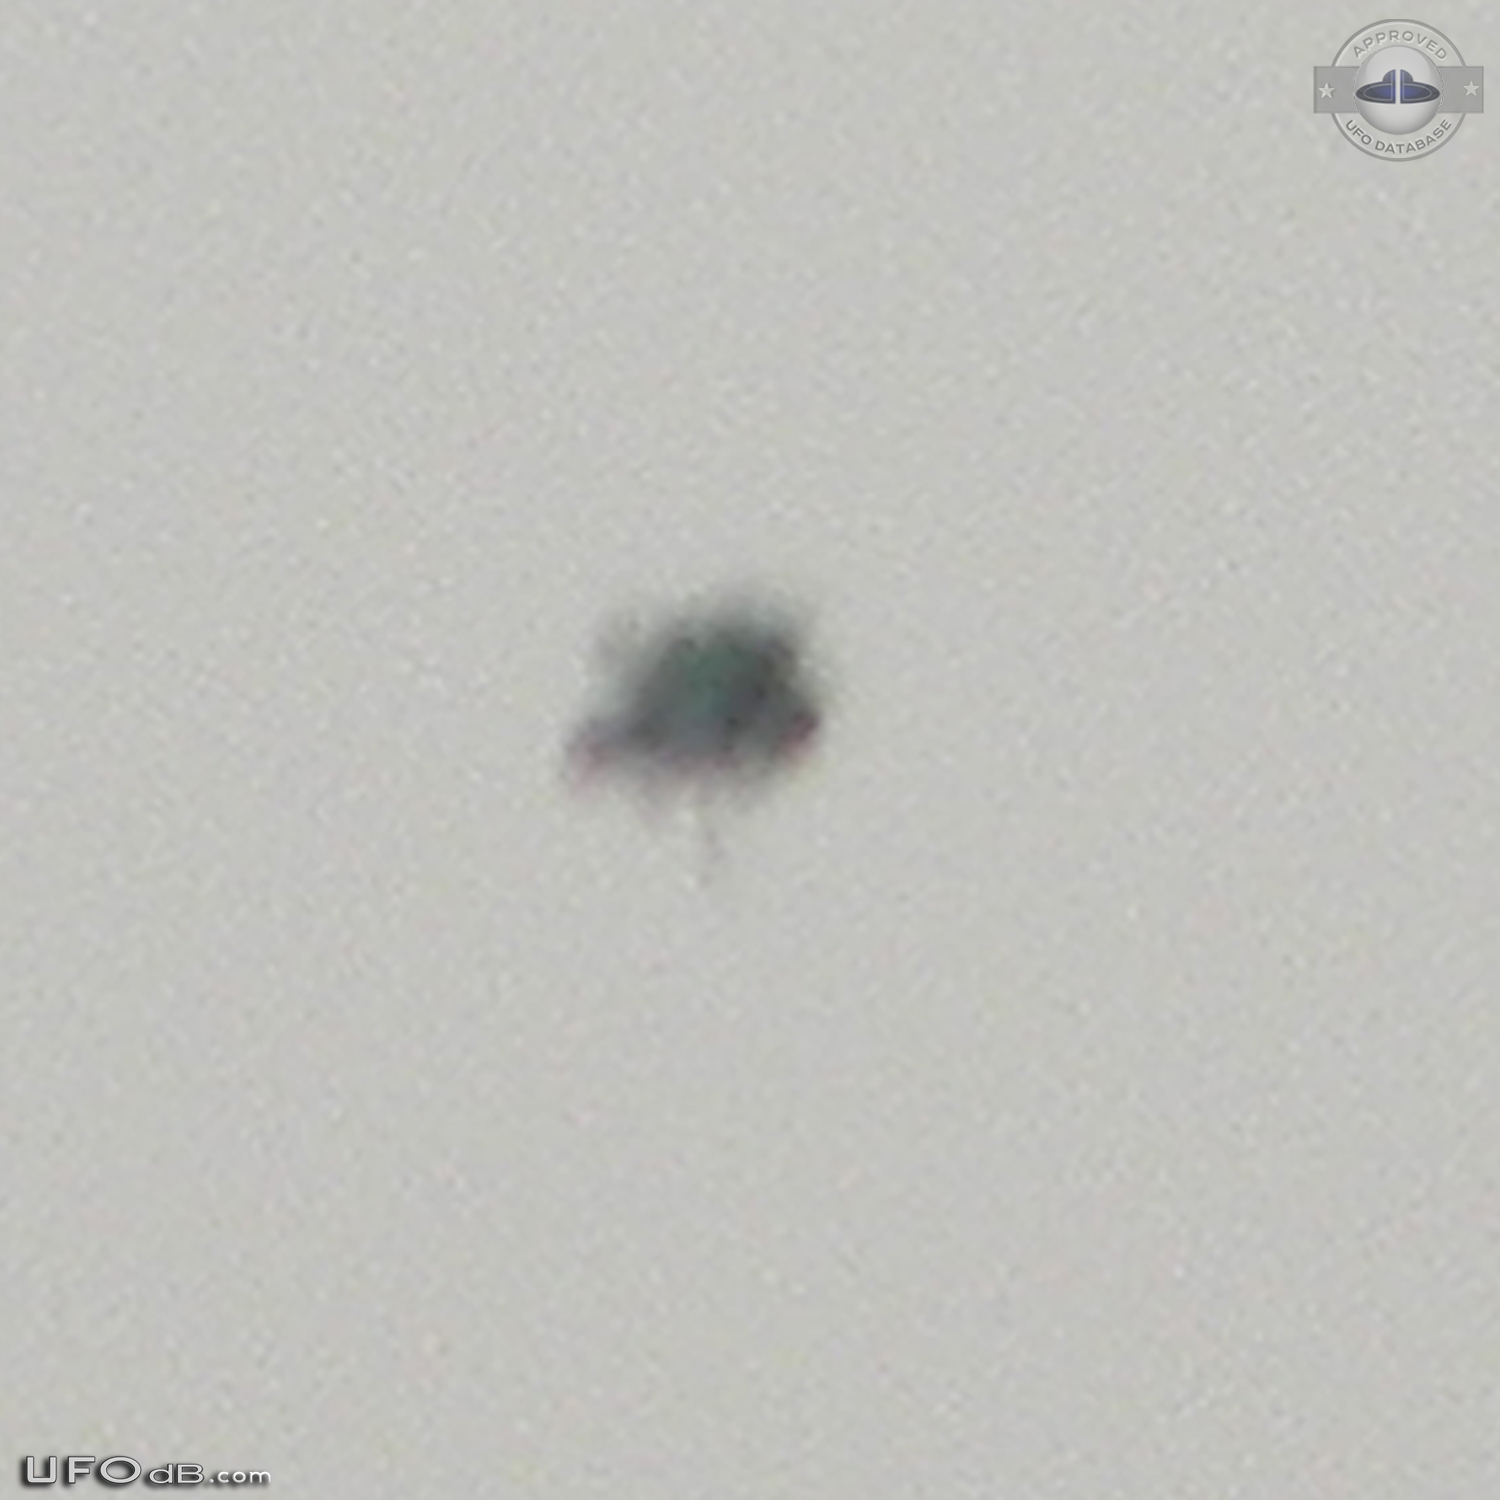 UFO hovered over Lake Lewisville in Texas and extended appendage 2014 UFO Picture #570-5